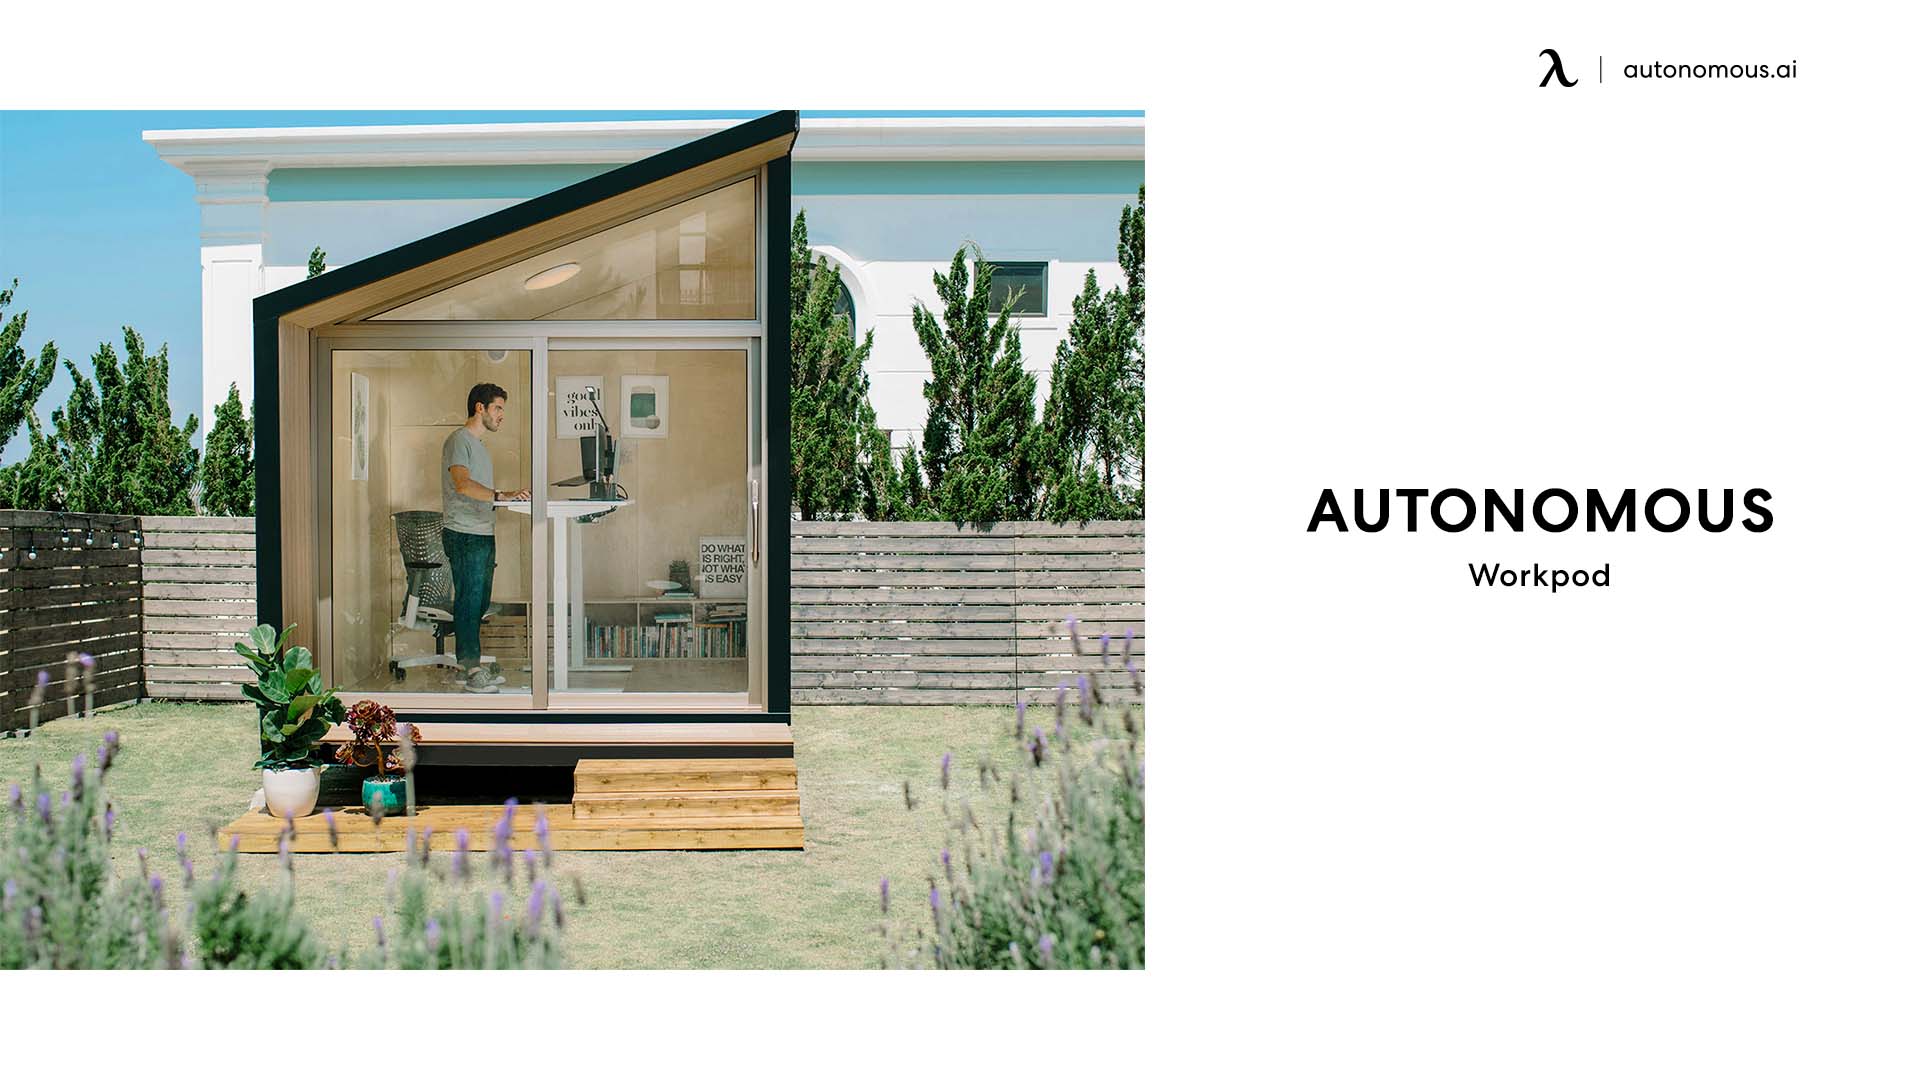 Autonomous WorkPod small office shed